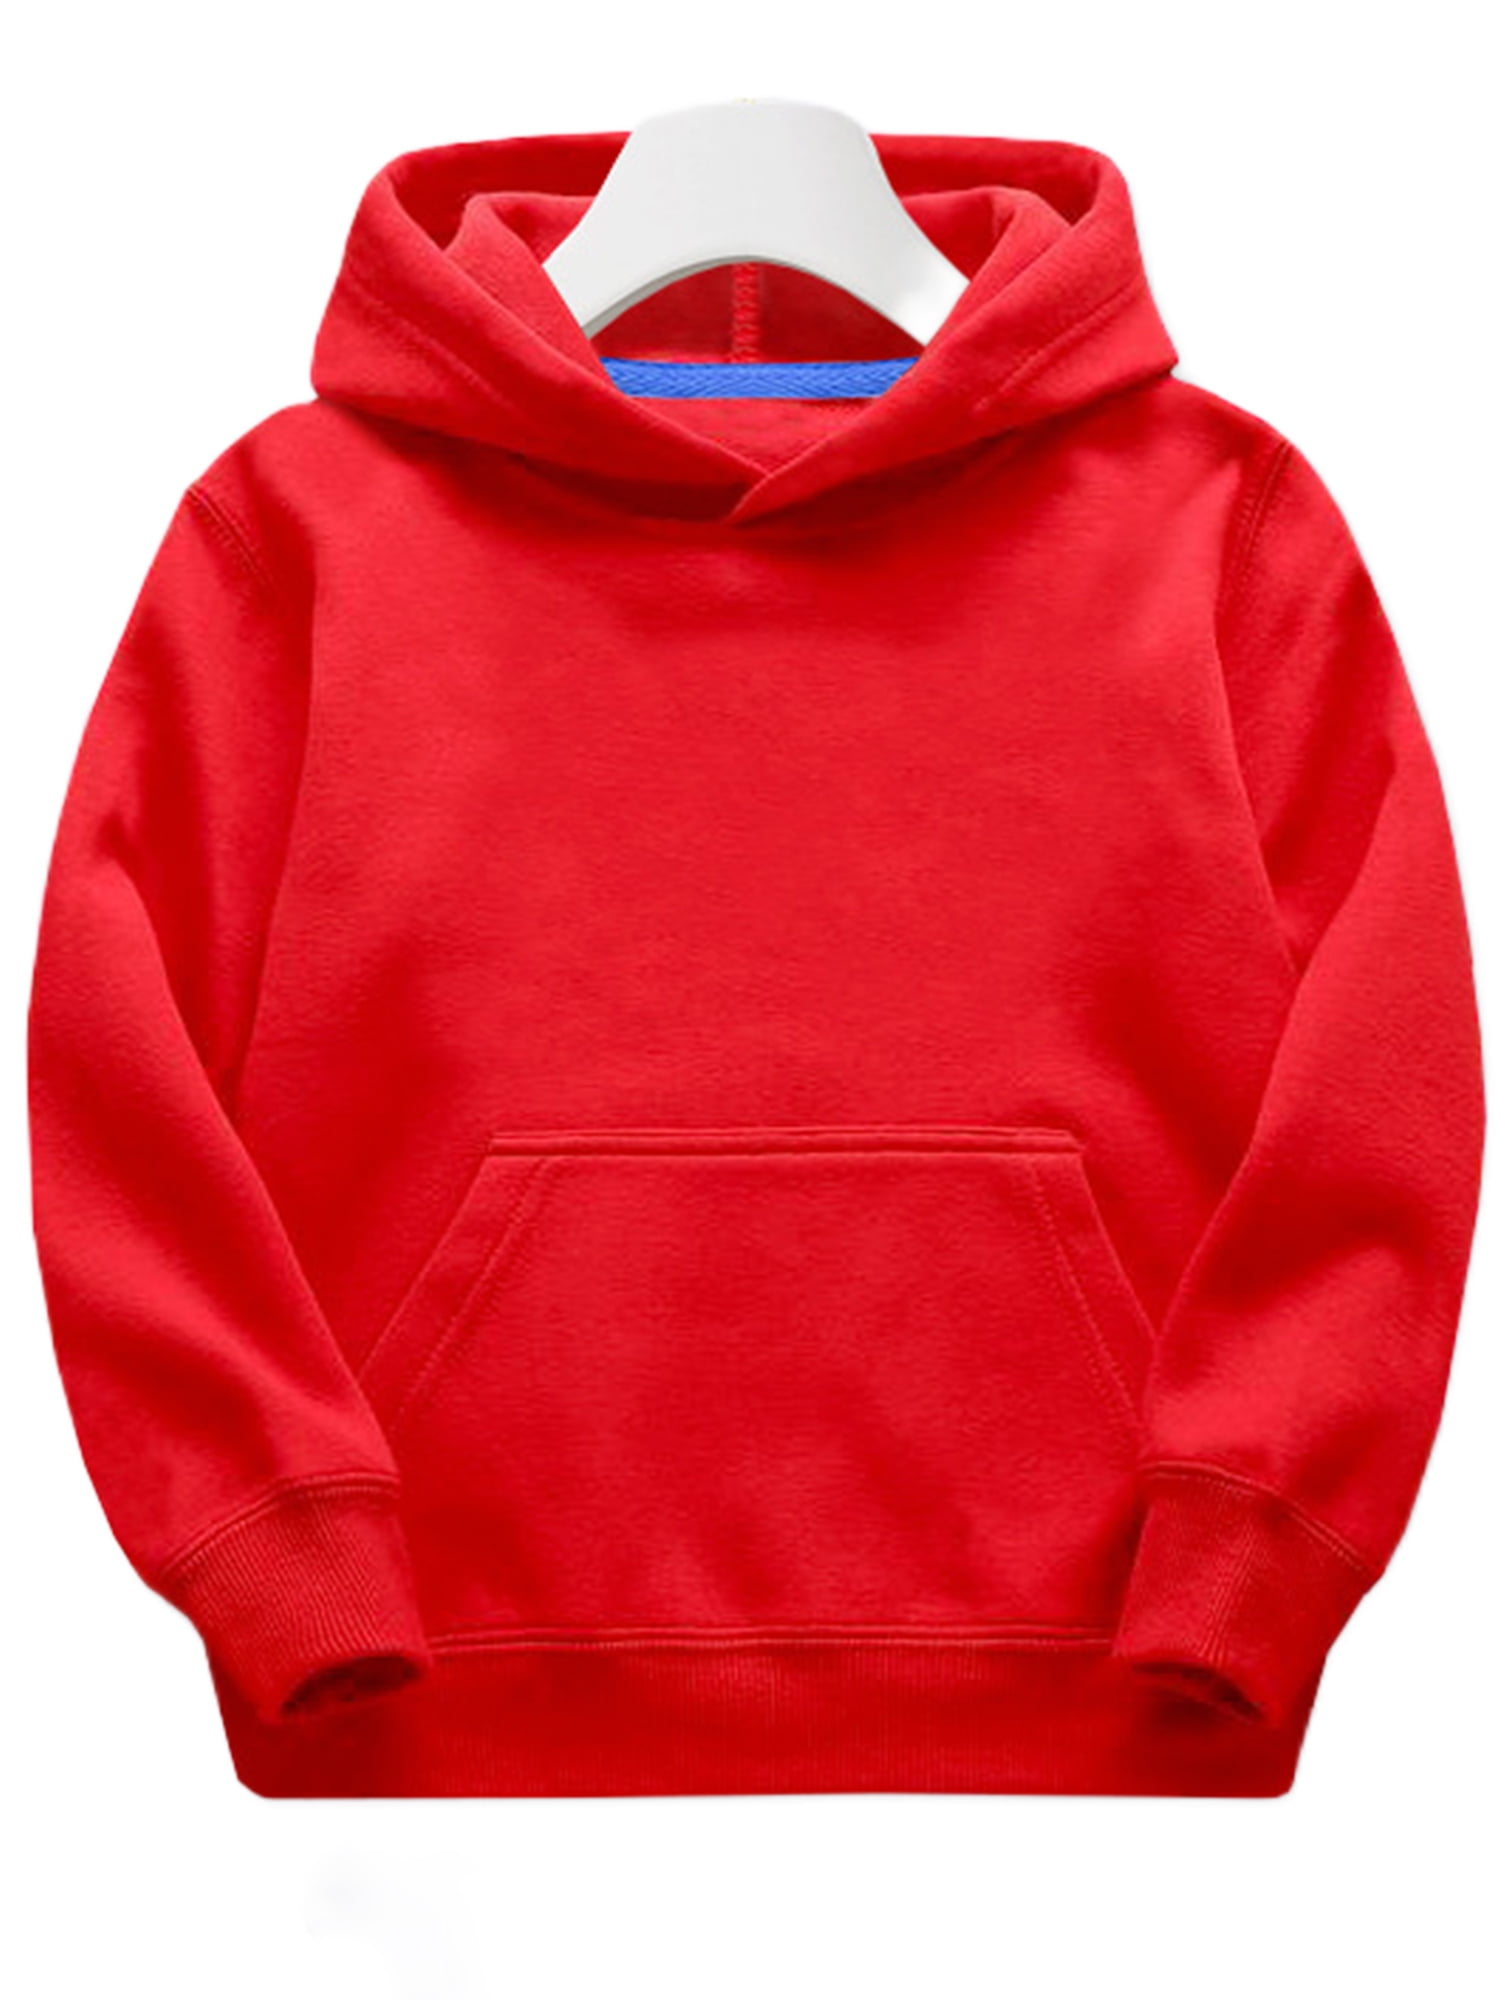 SuperSoft Fleece Blank Hoodies For Men And Women Thickened